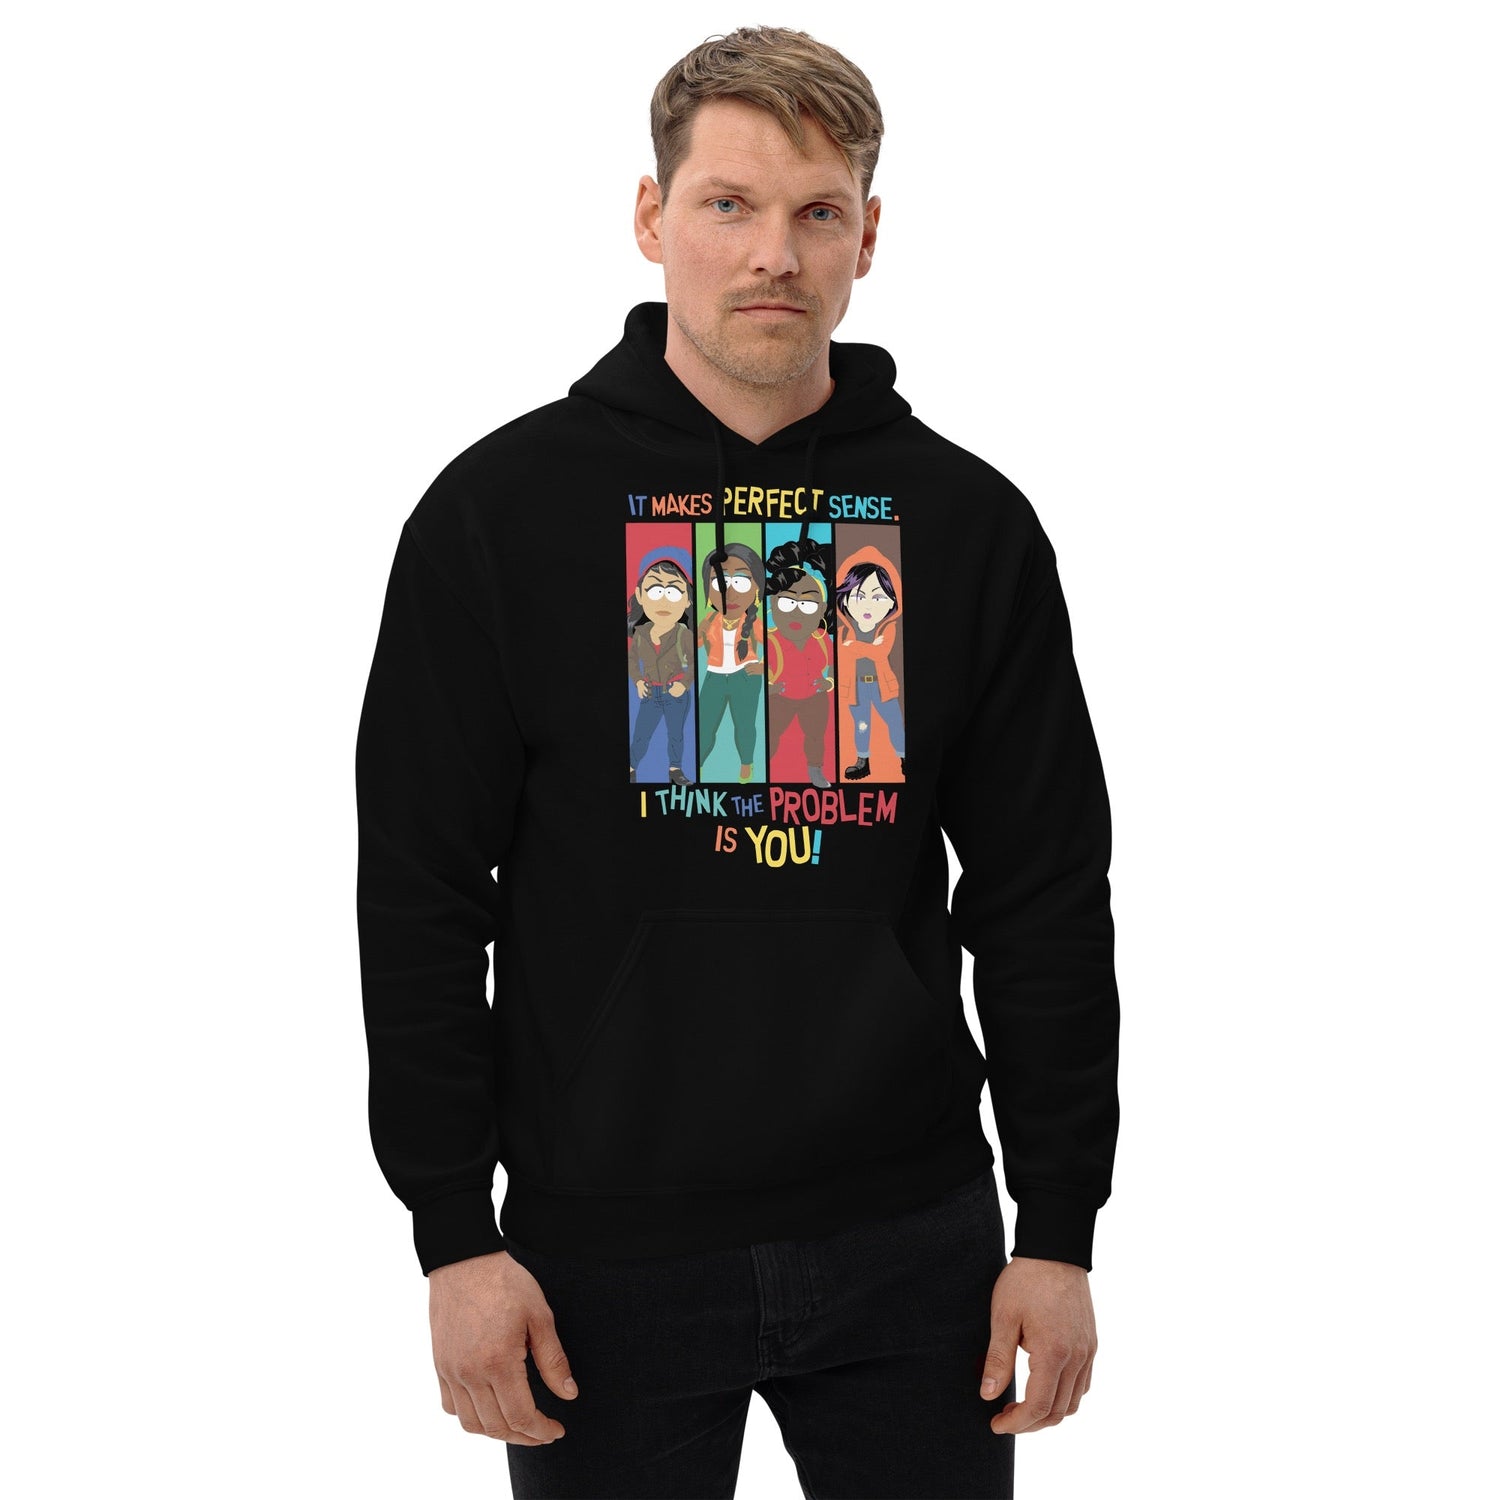 South Park: Joining the Panderverse Adult Hoodie - Paramount Shop